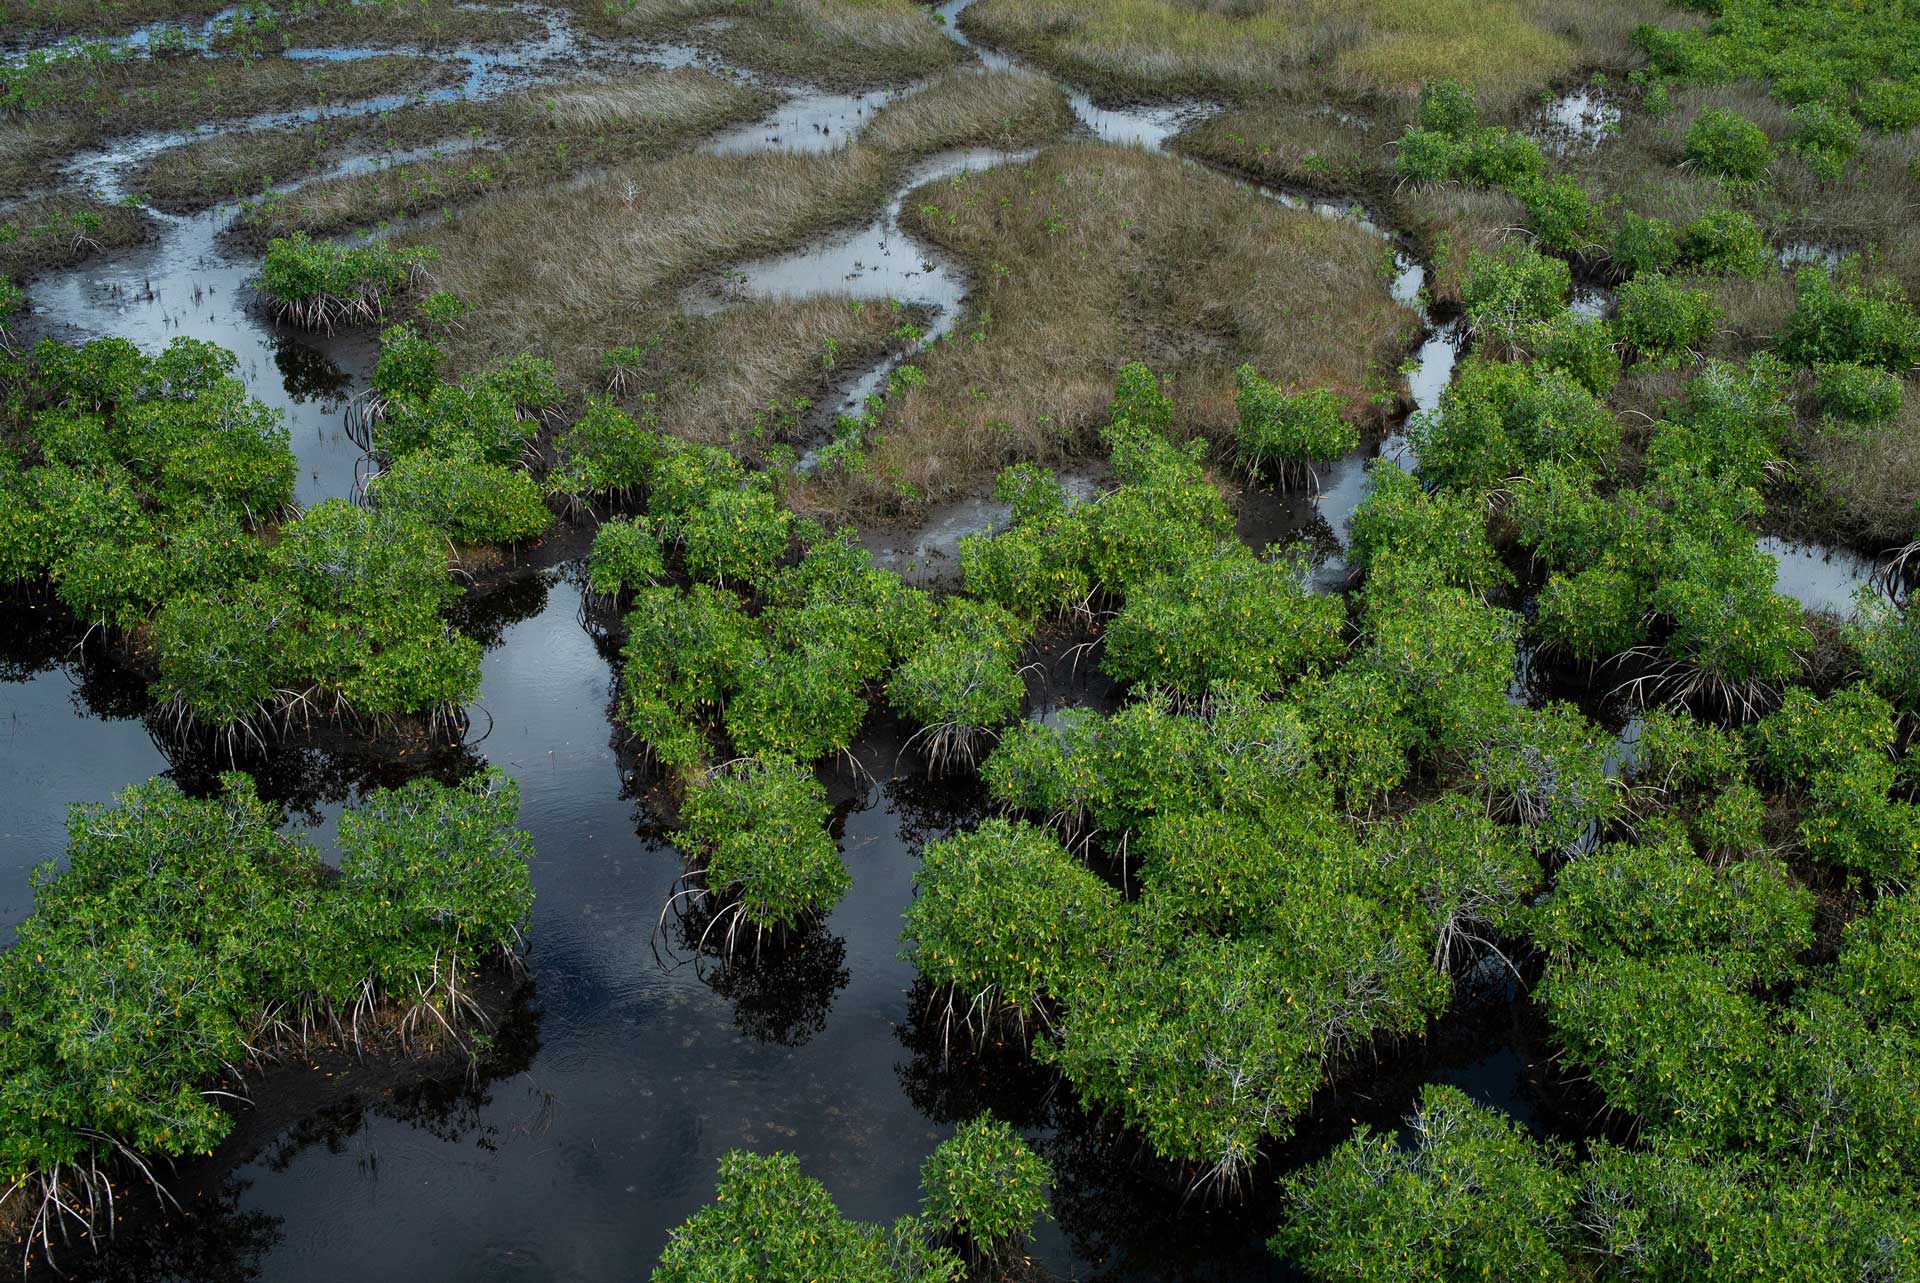 Aerial photo of mangroves in the Everglades, Florida.